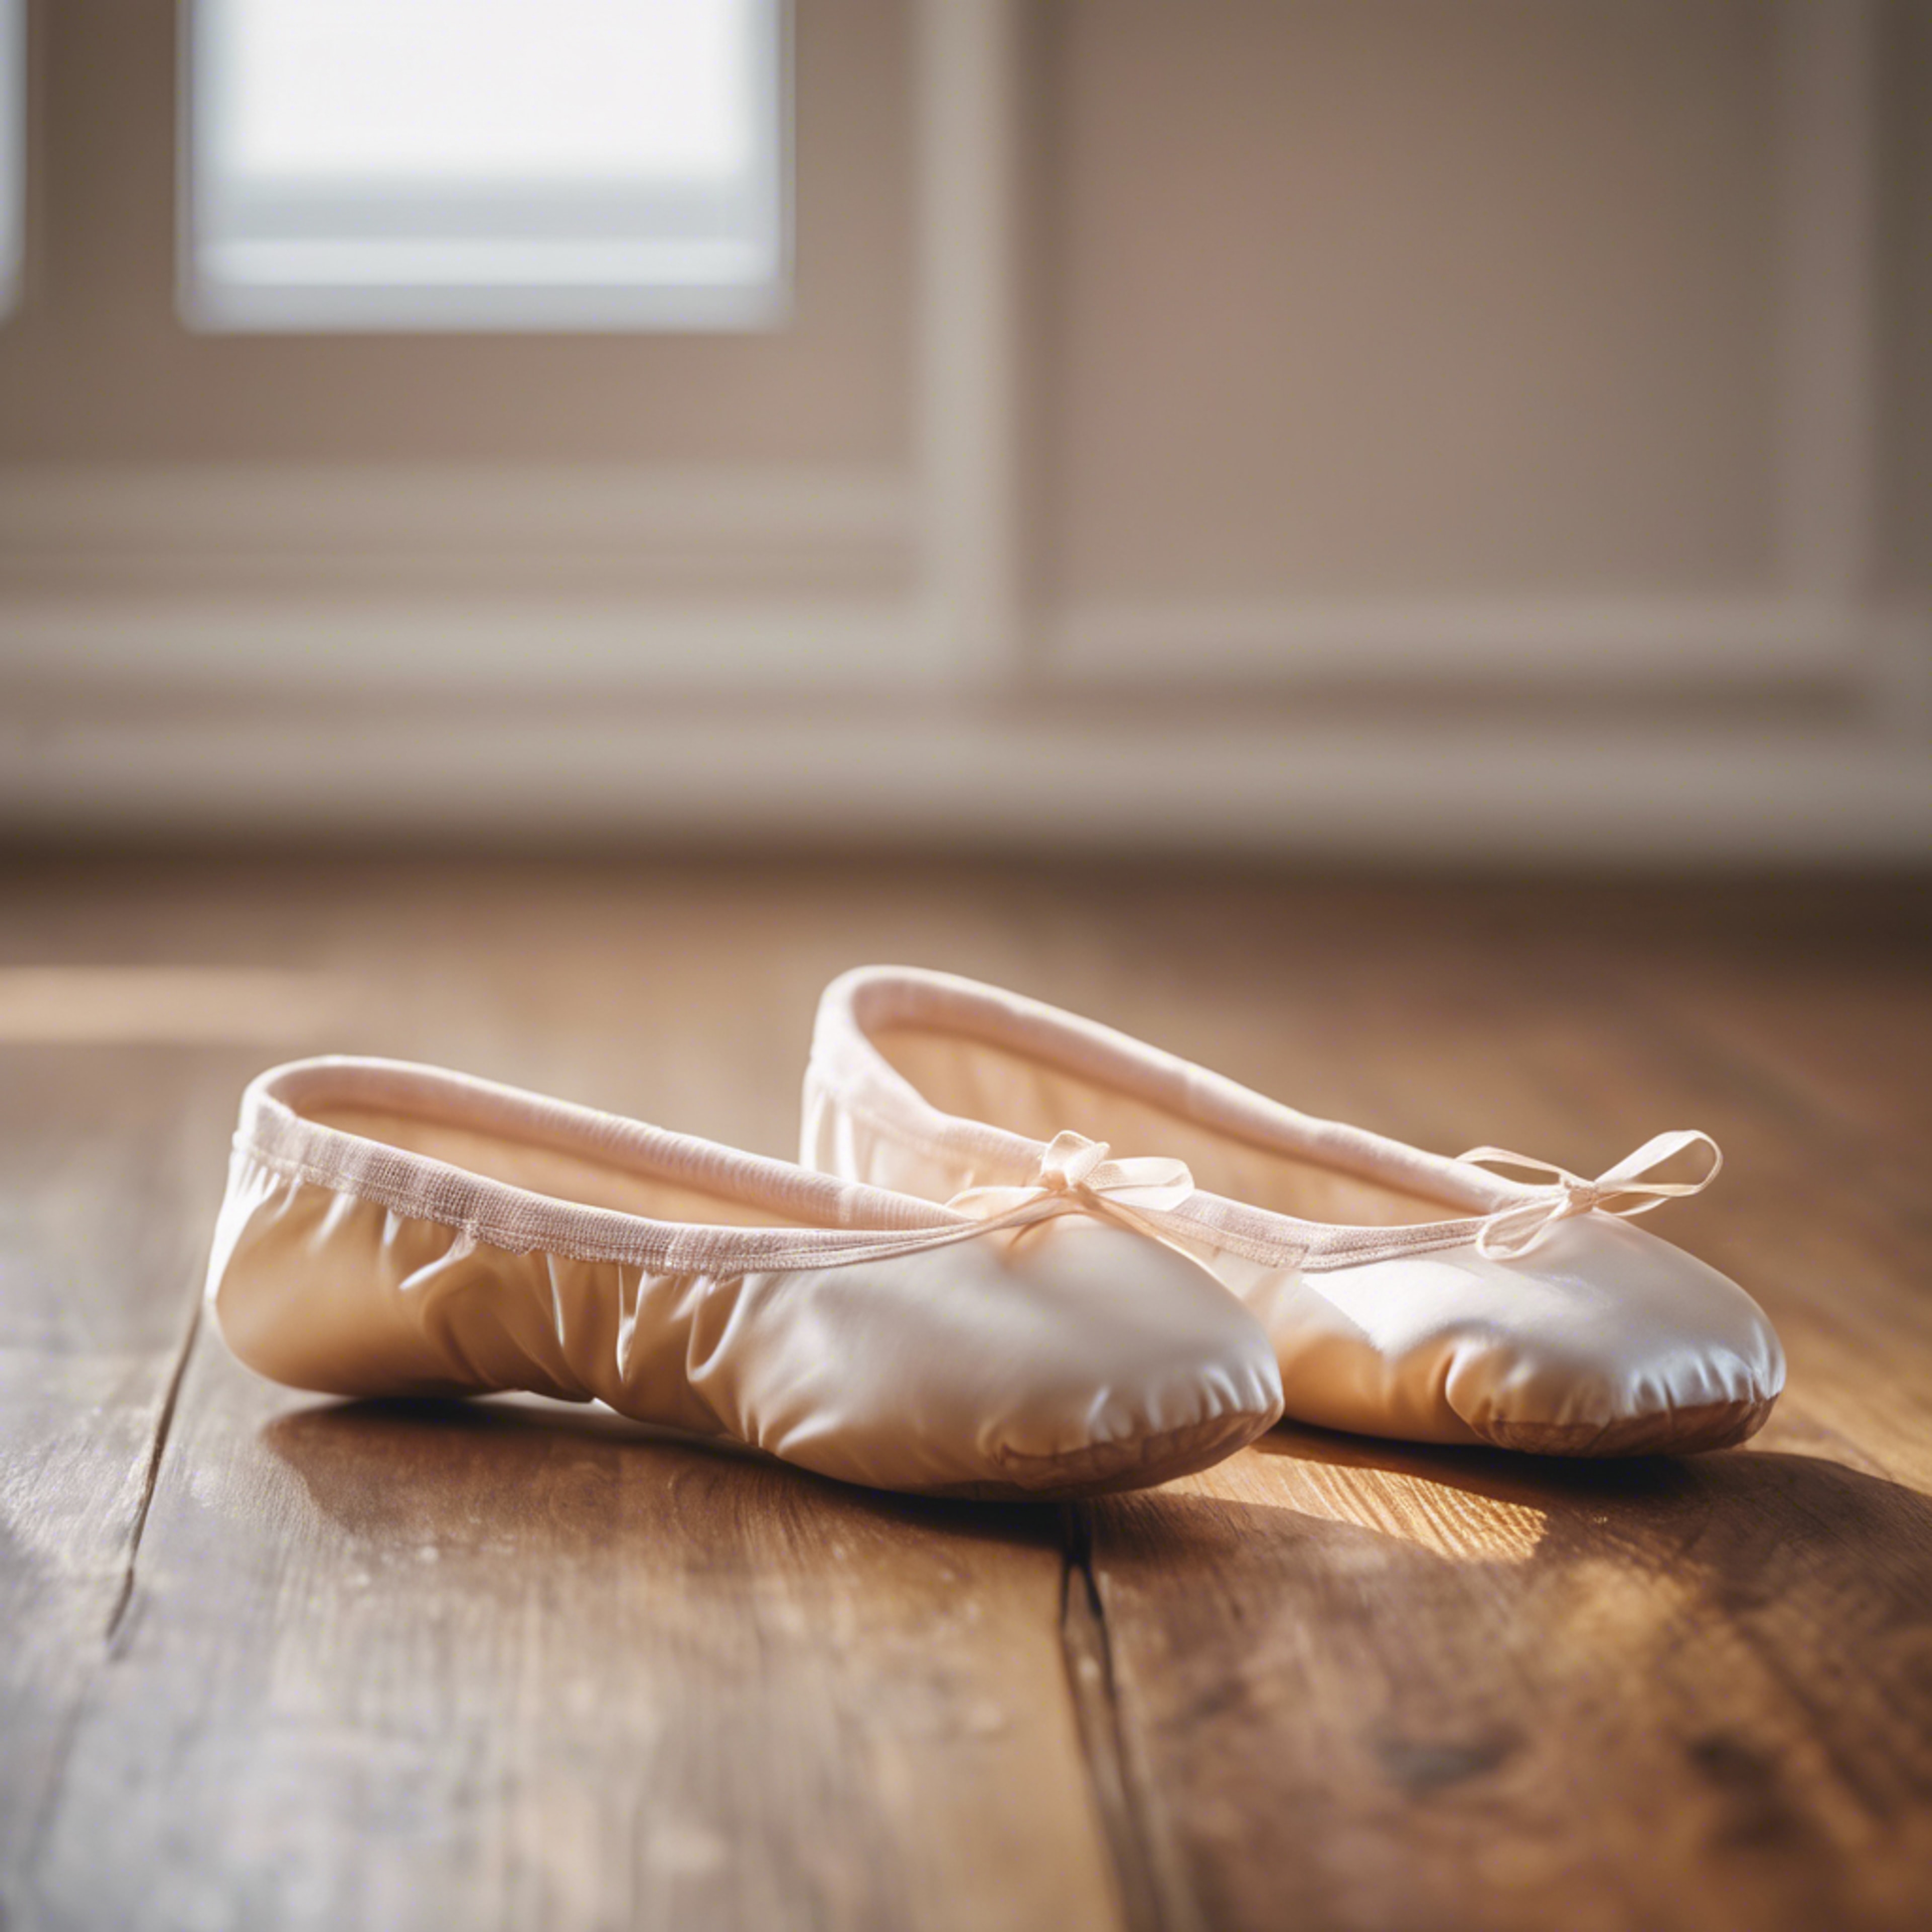 Close up of a pair of cream-colored ballet slippers on a hardwood floor. วอลล์เปเปอร์[4efd7208256149a9b923]